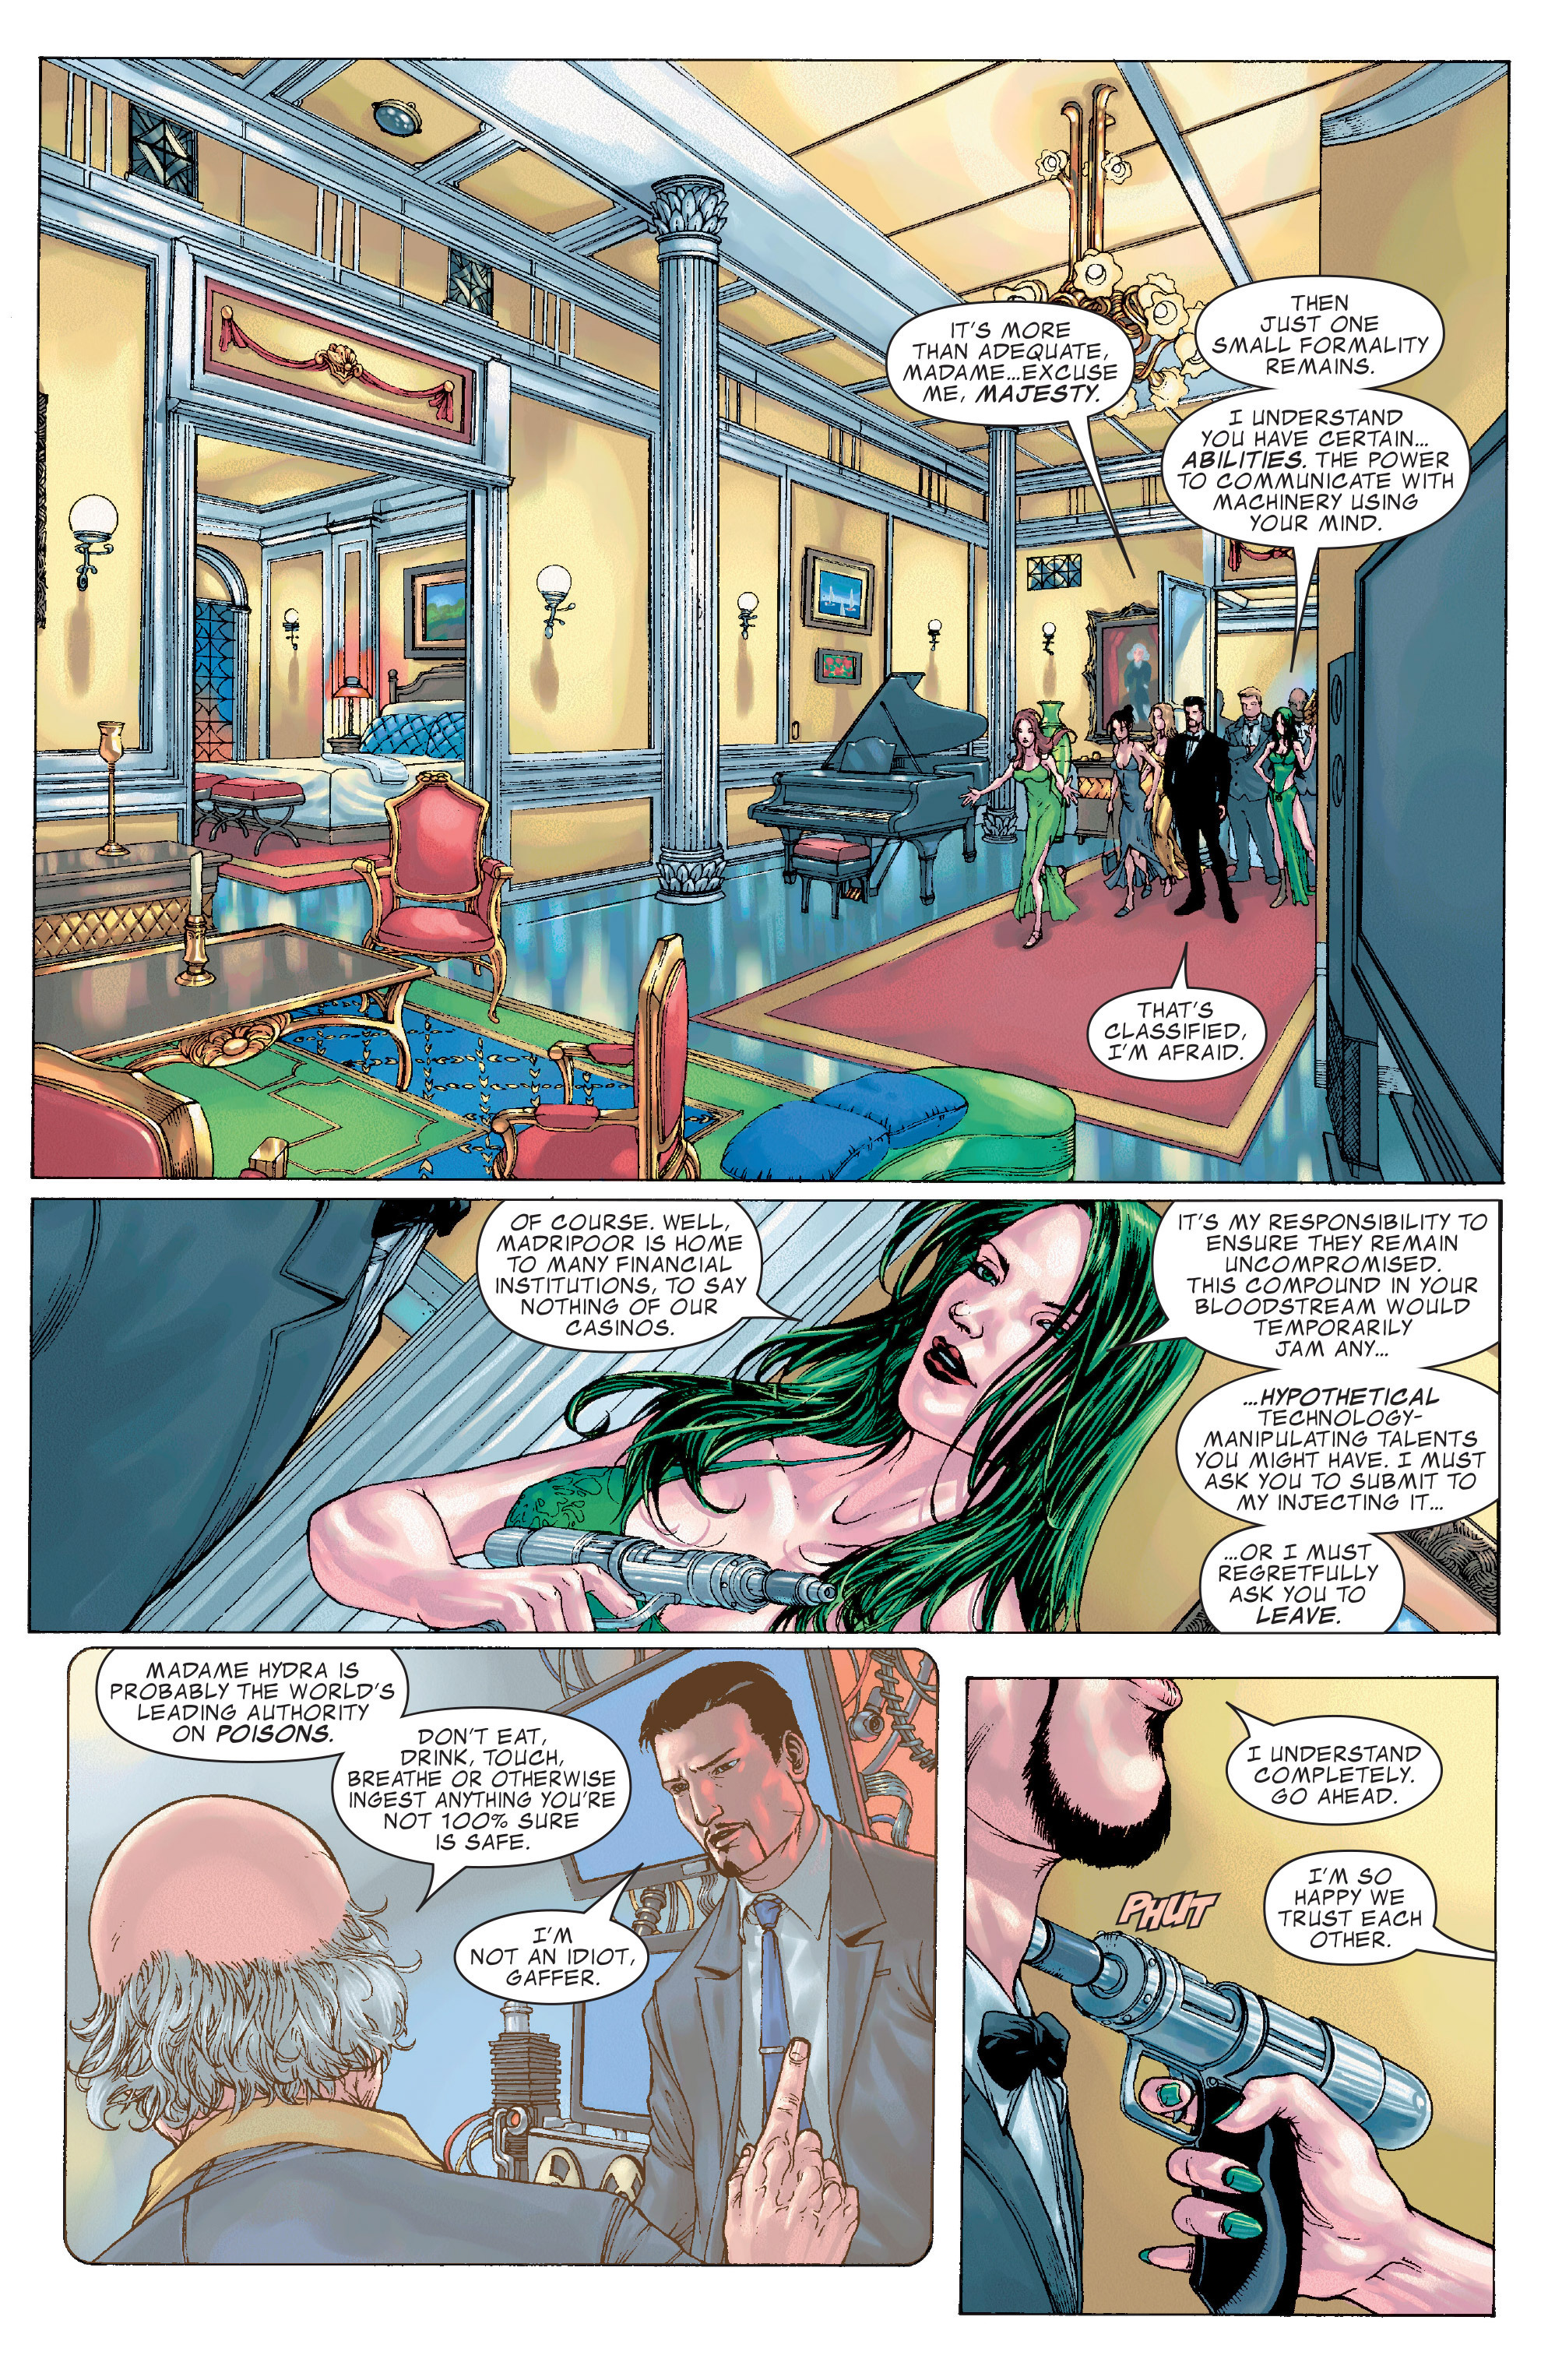 Iron Man: Director of S.H.I.E.L.D. Annual Full Page 9